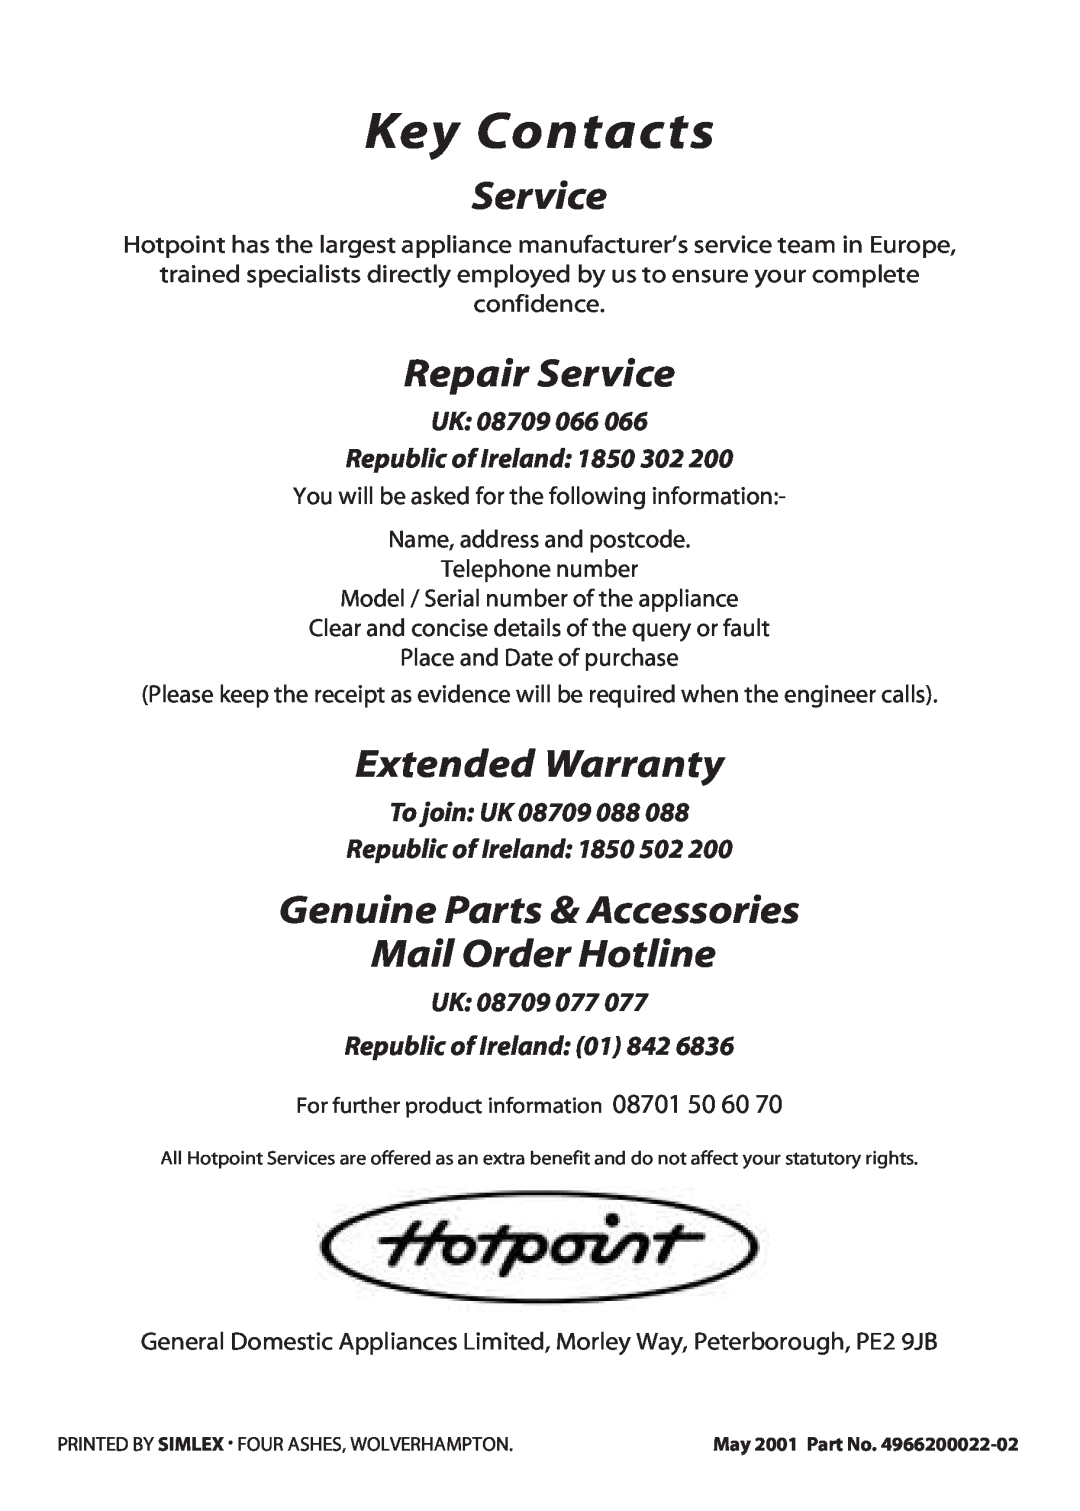 Hotpoint EW51 manual Key Contacts, Repair Service, Extended Warranty, Genuine Parts & Accessories Mail Order Hotline 